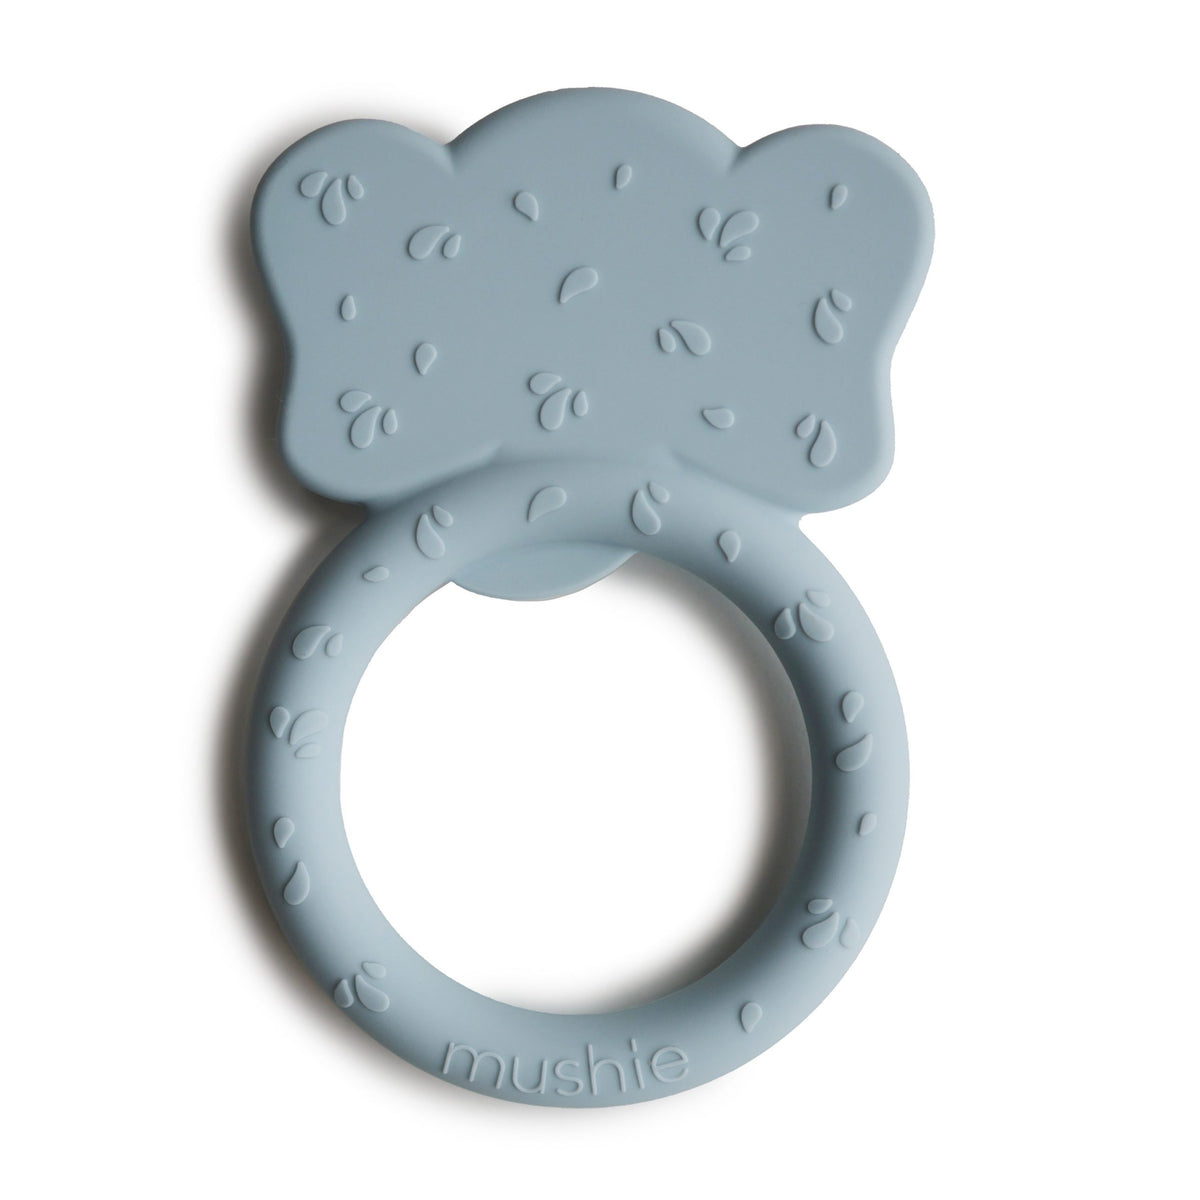 Mushie Elephant Silicone Teether - Cloud